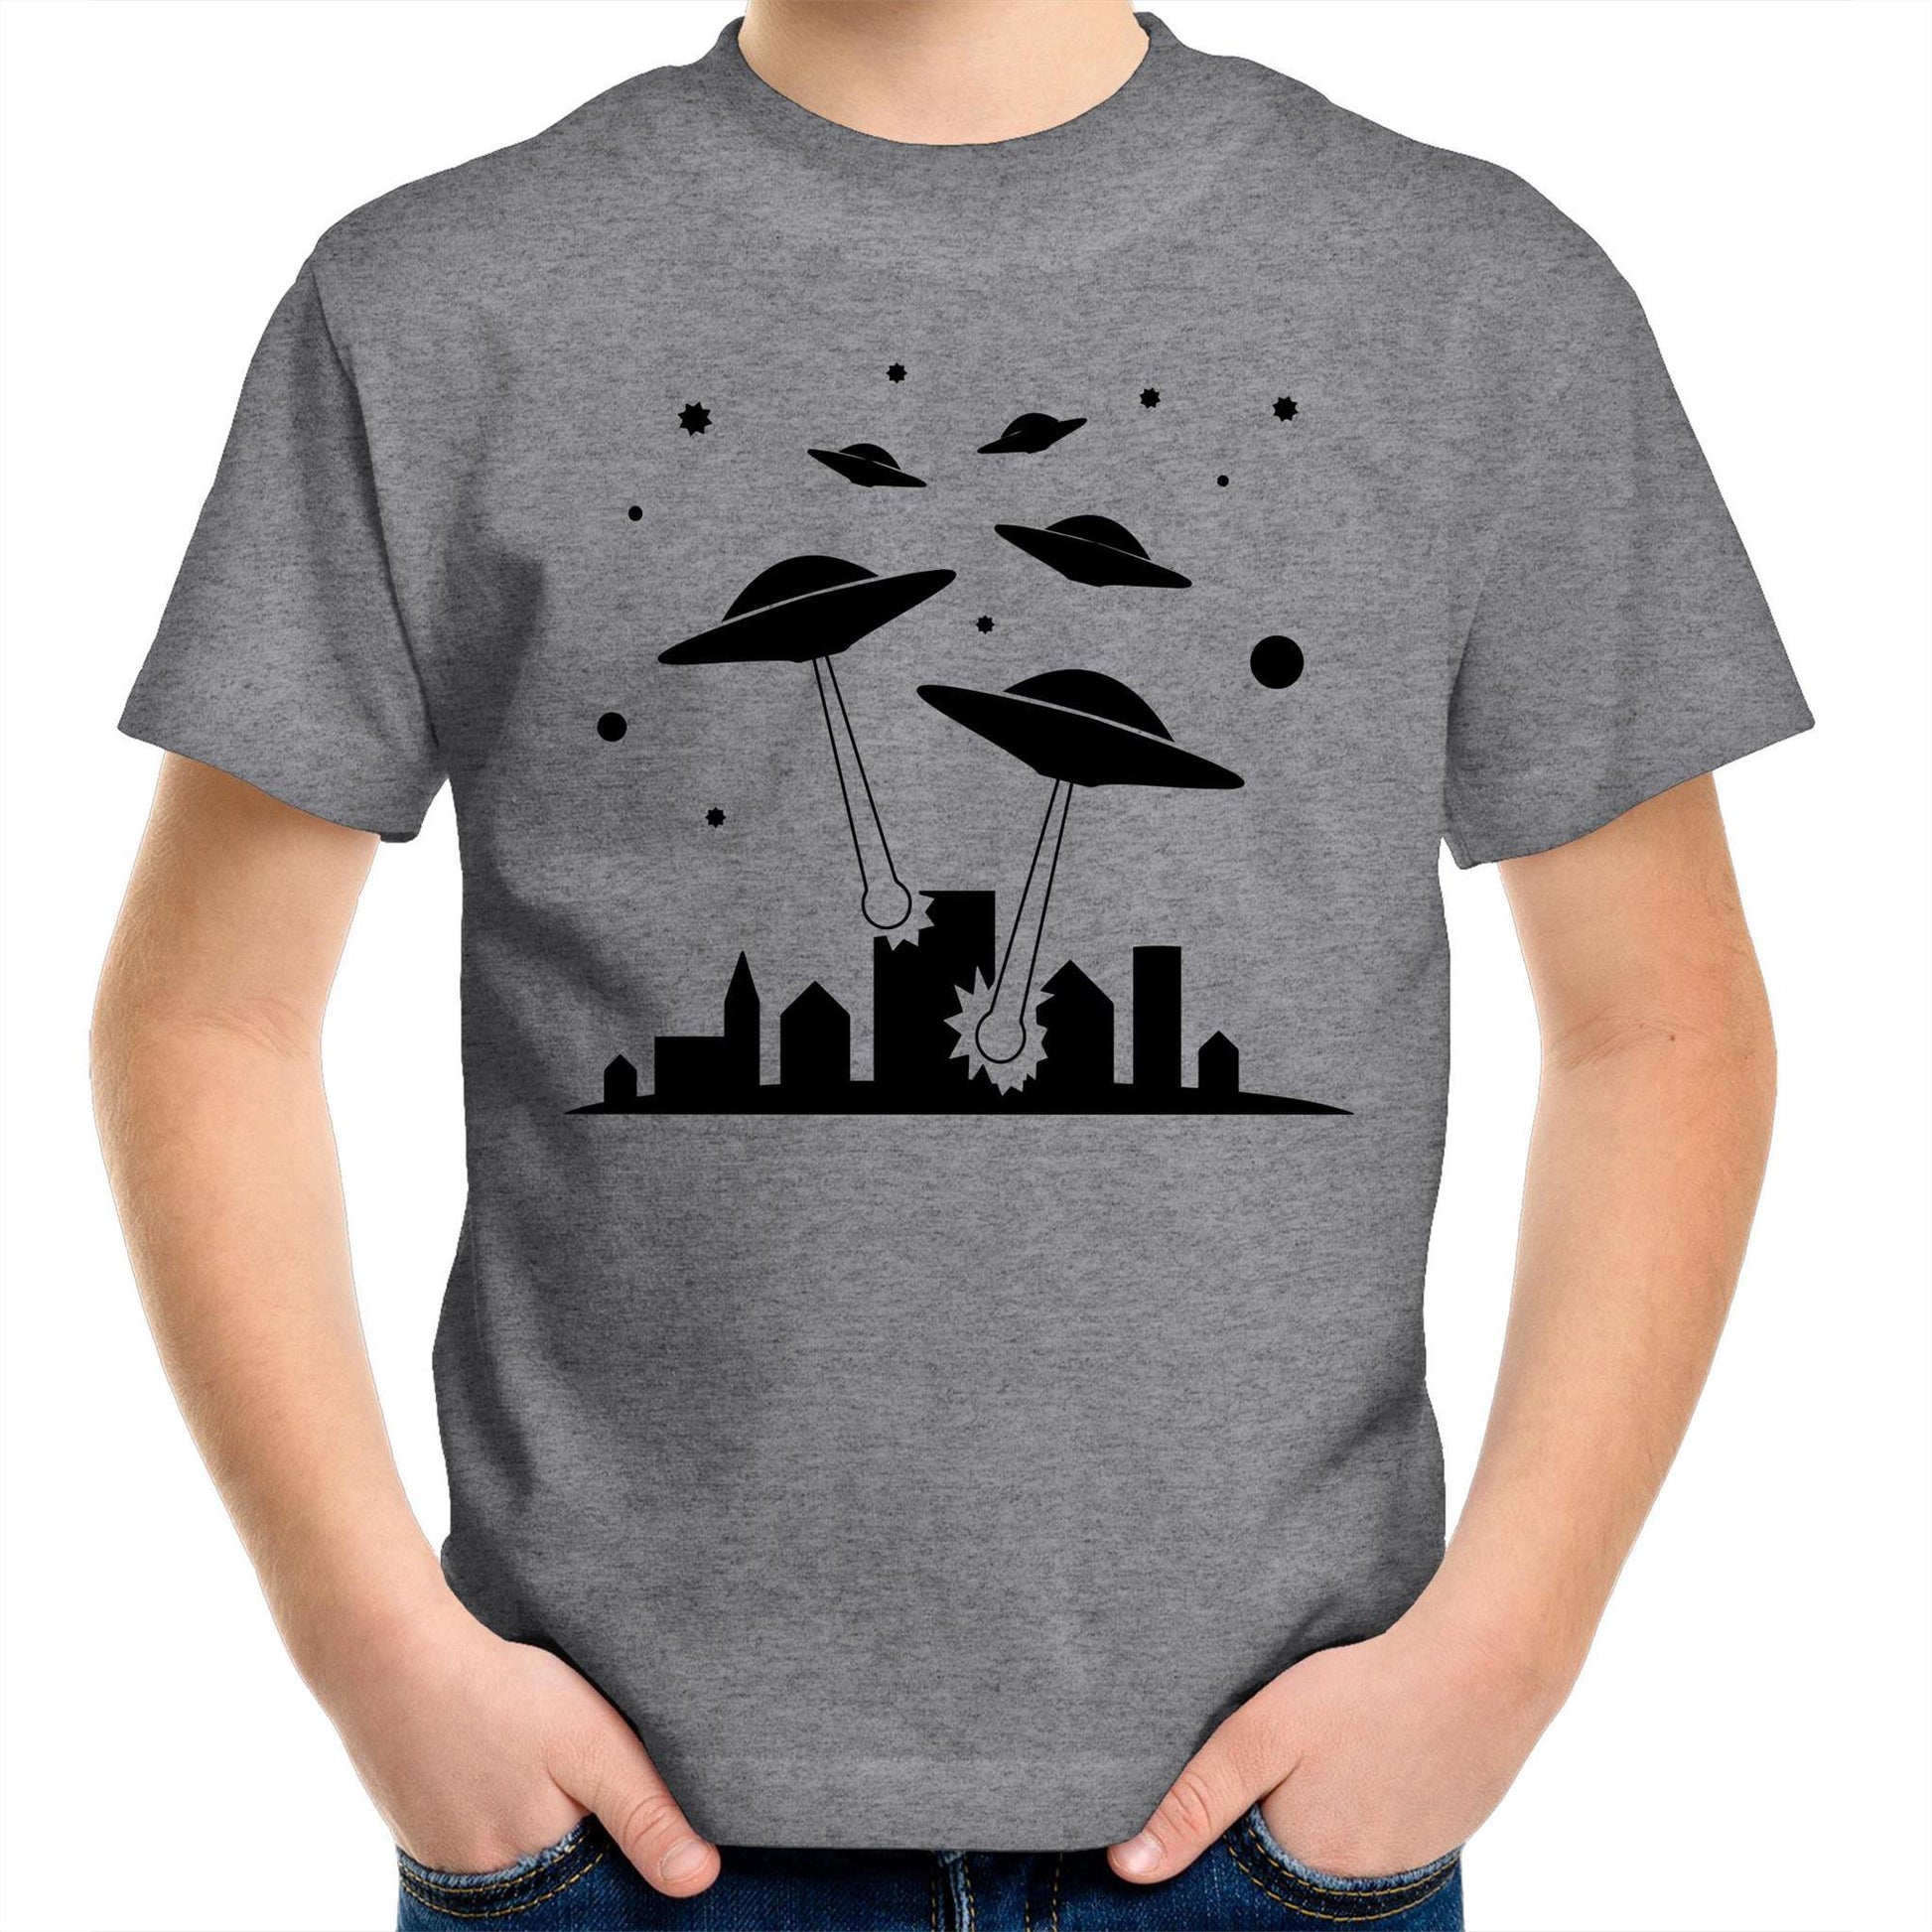 Space Invasion - Kids Youth Crew T-Shirt Grey Marle Kids Youth T-shirt